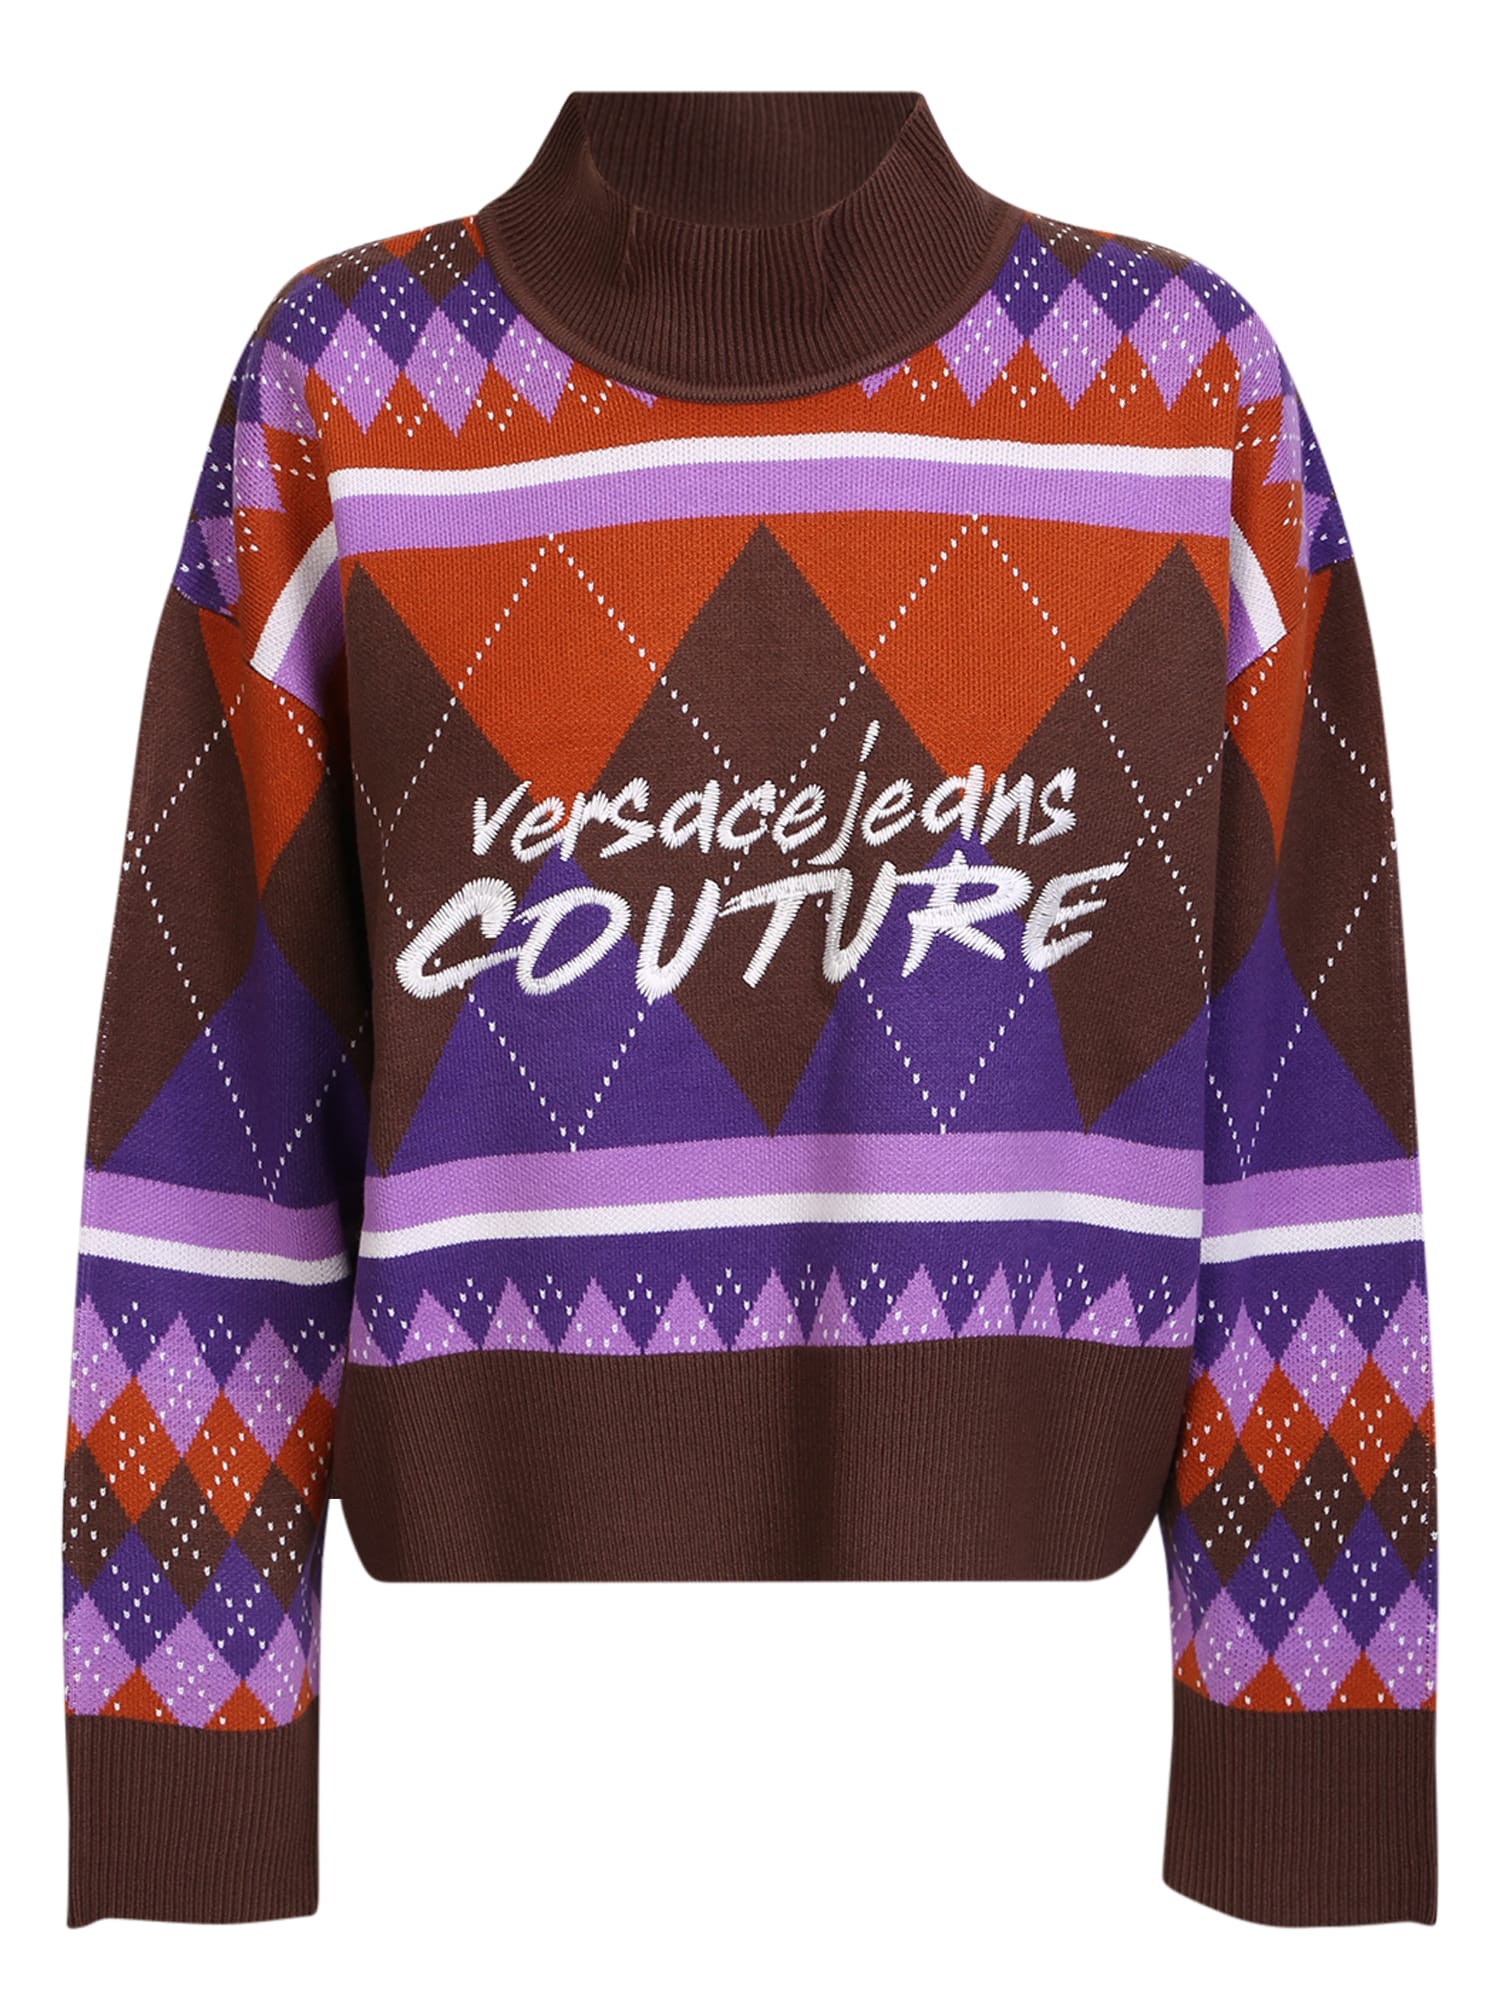 Versace Jeans Couture Patterned Pullover Argyle Knit